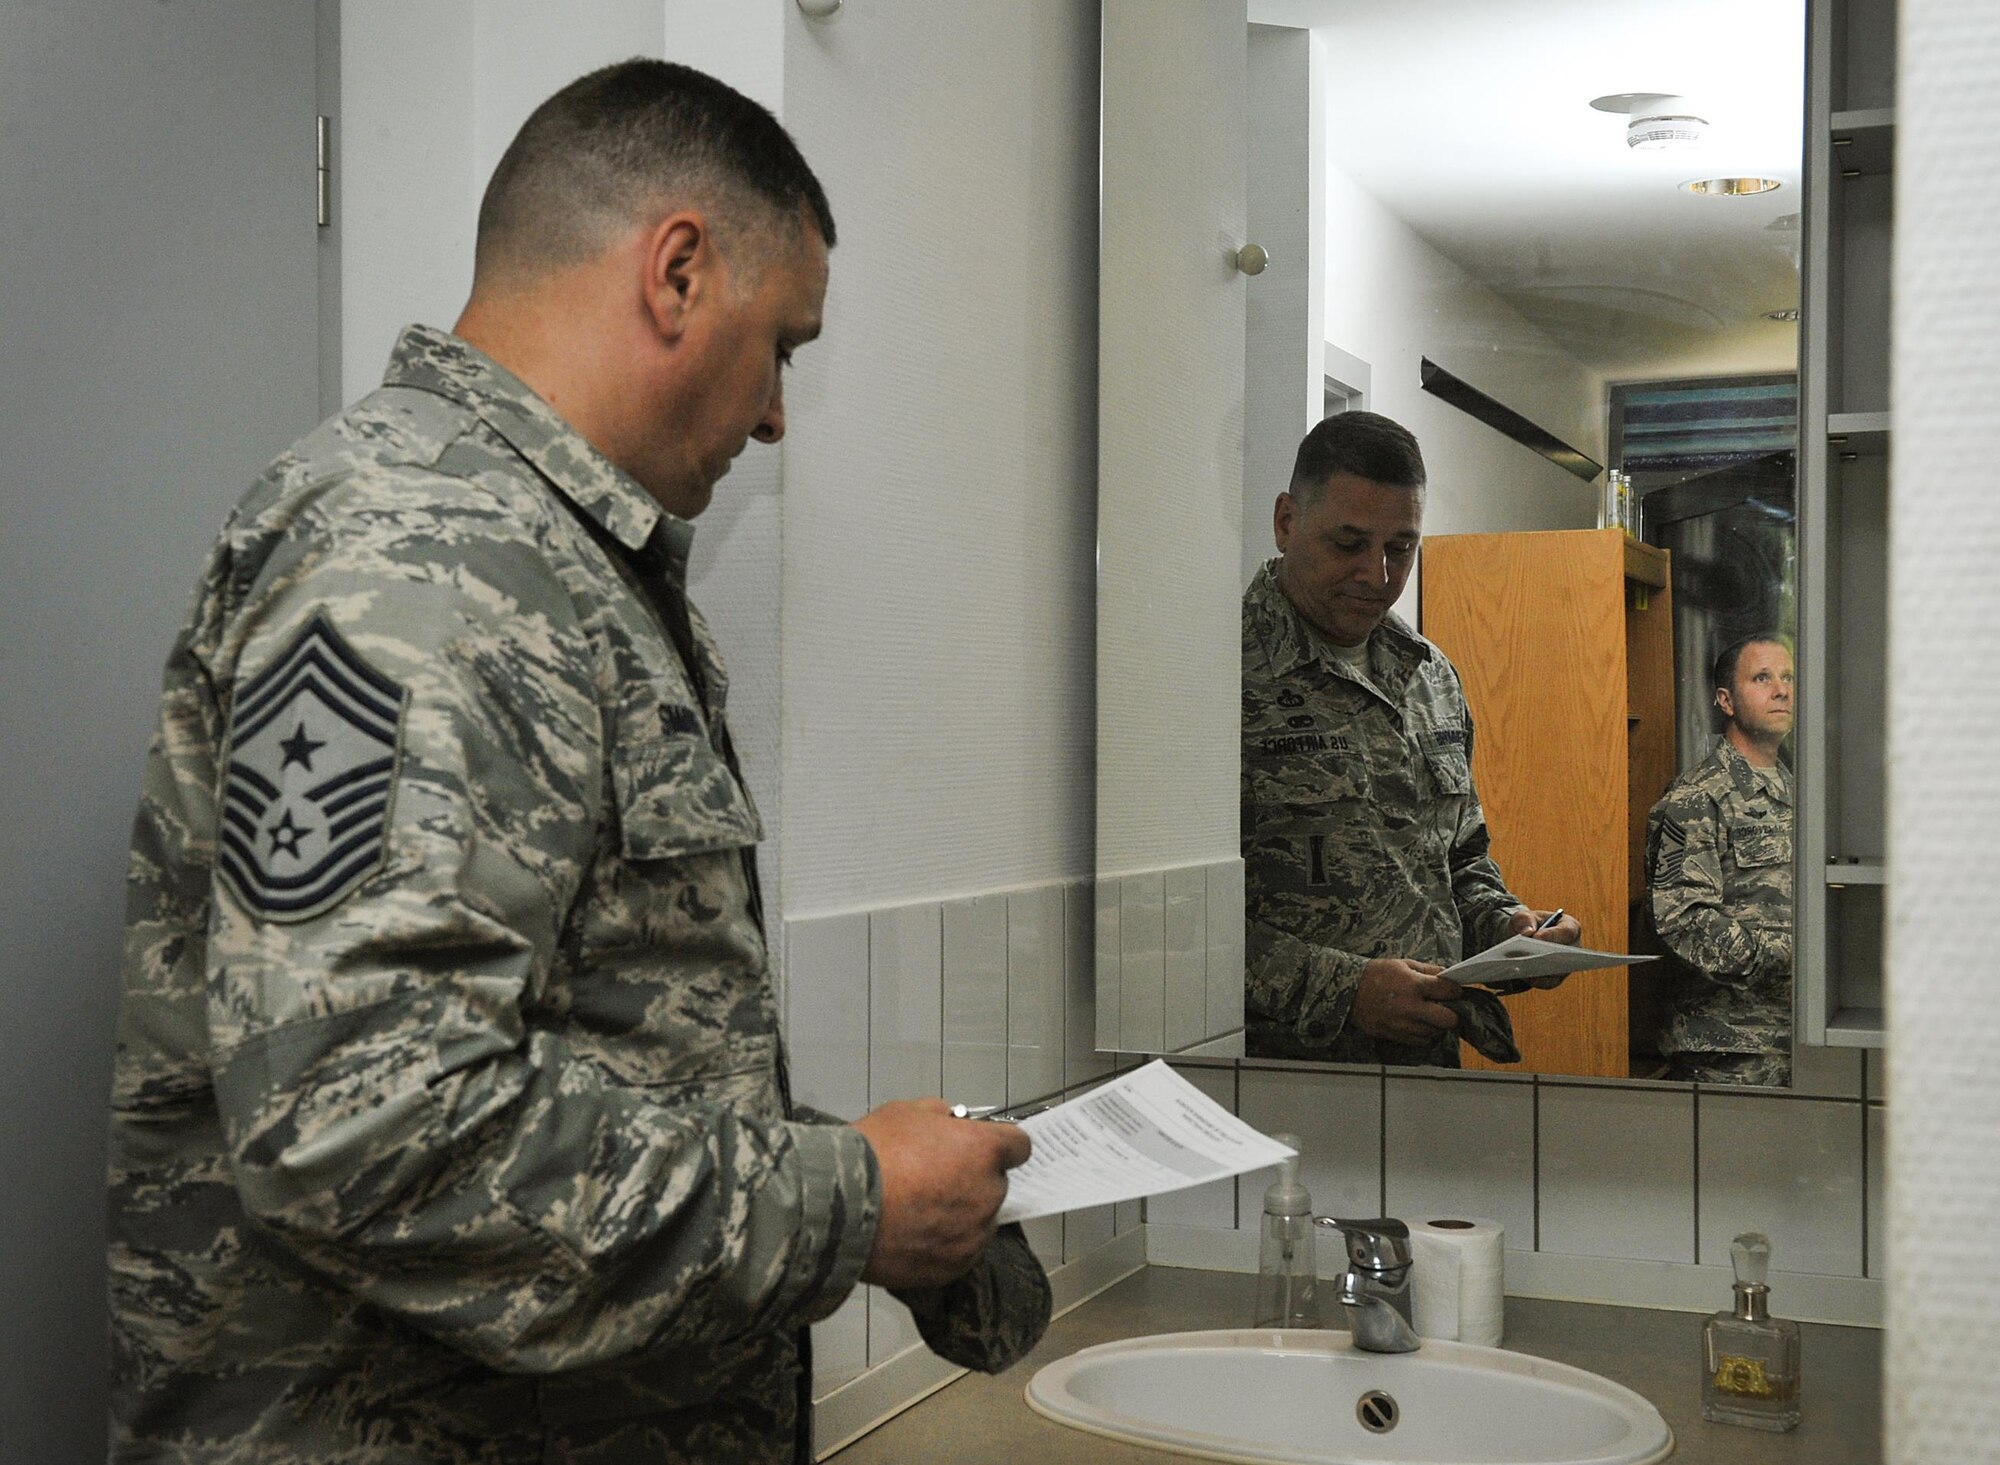 Chief Master Sgt. Todd Simmons, 435th Air Ground Operations Wing command chief, inspects an Airman’s room May 17, 2016, at Ramstein Air Base, Germany. For Ramstein’s first dorm of the quarter award, the first place dorm building received a $1,000 budget and the second place winners earned $500 to go toward whatever the residents agree upon to maintain or better their living quarters. (U.S. Air Force photo/Senior Airman Larissa Greatwood)